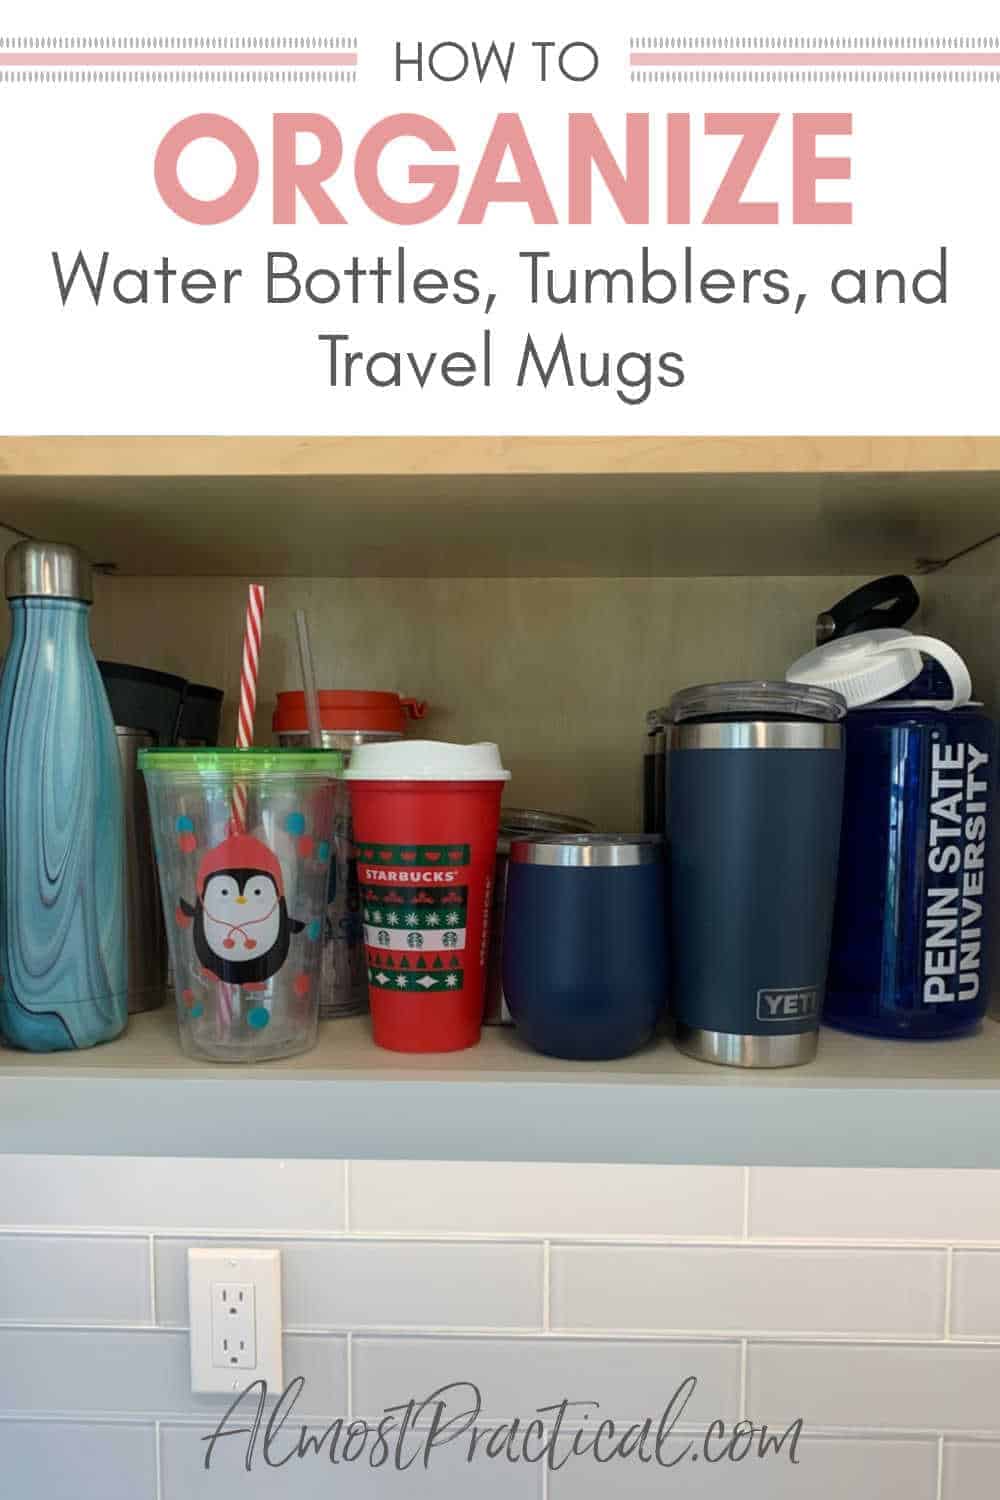 How to Organize Your Water Bottles, Tumblers, and Travel Mugs